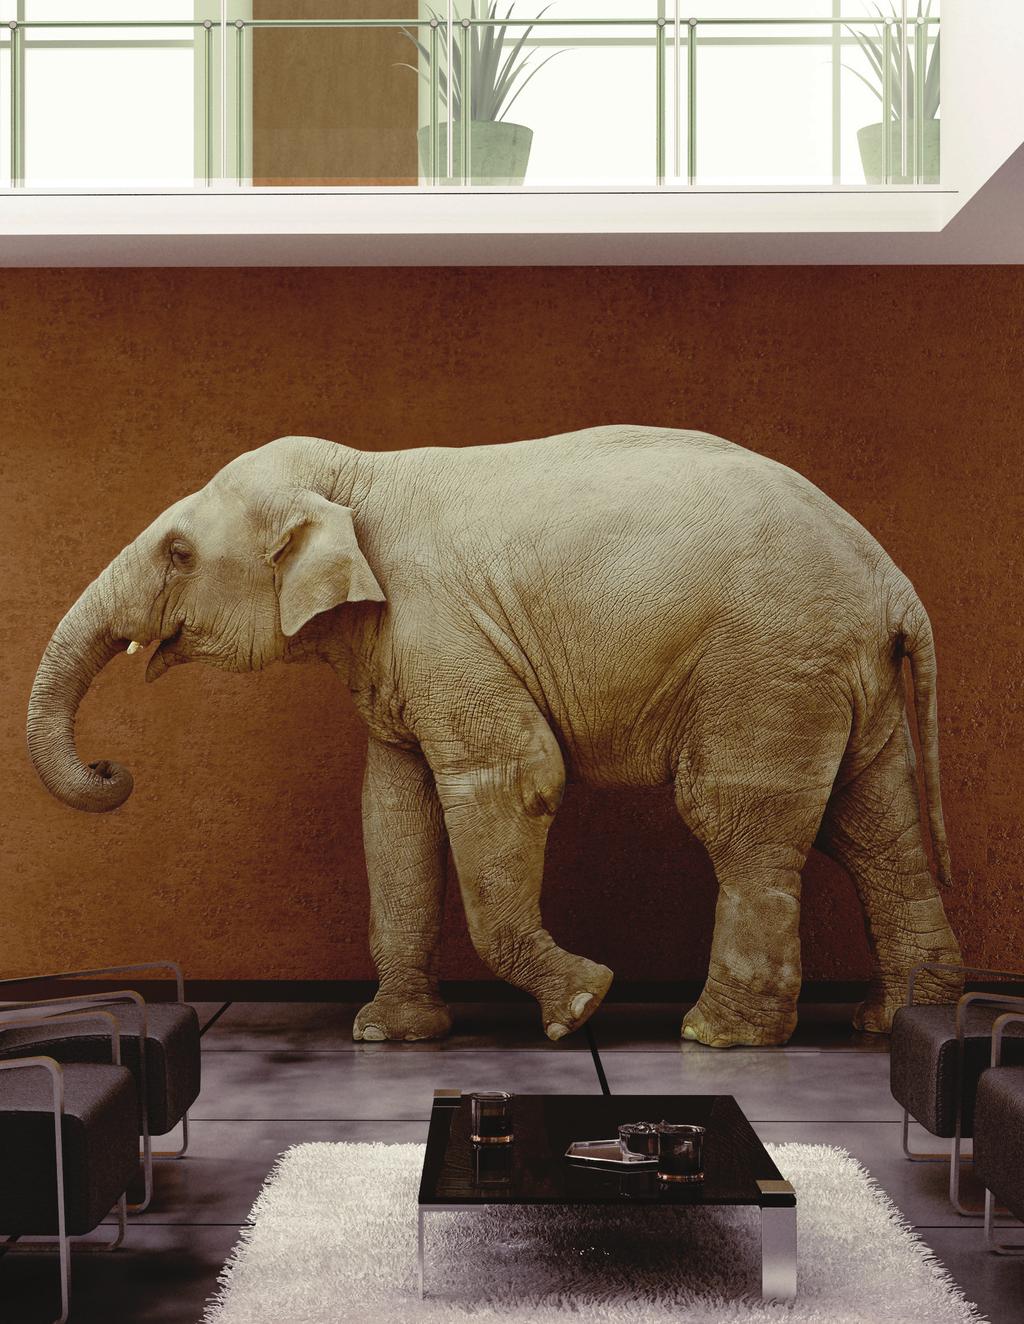 THE ELEPHANT IN THE NONPROFIT BOARDROOM How to Bring